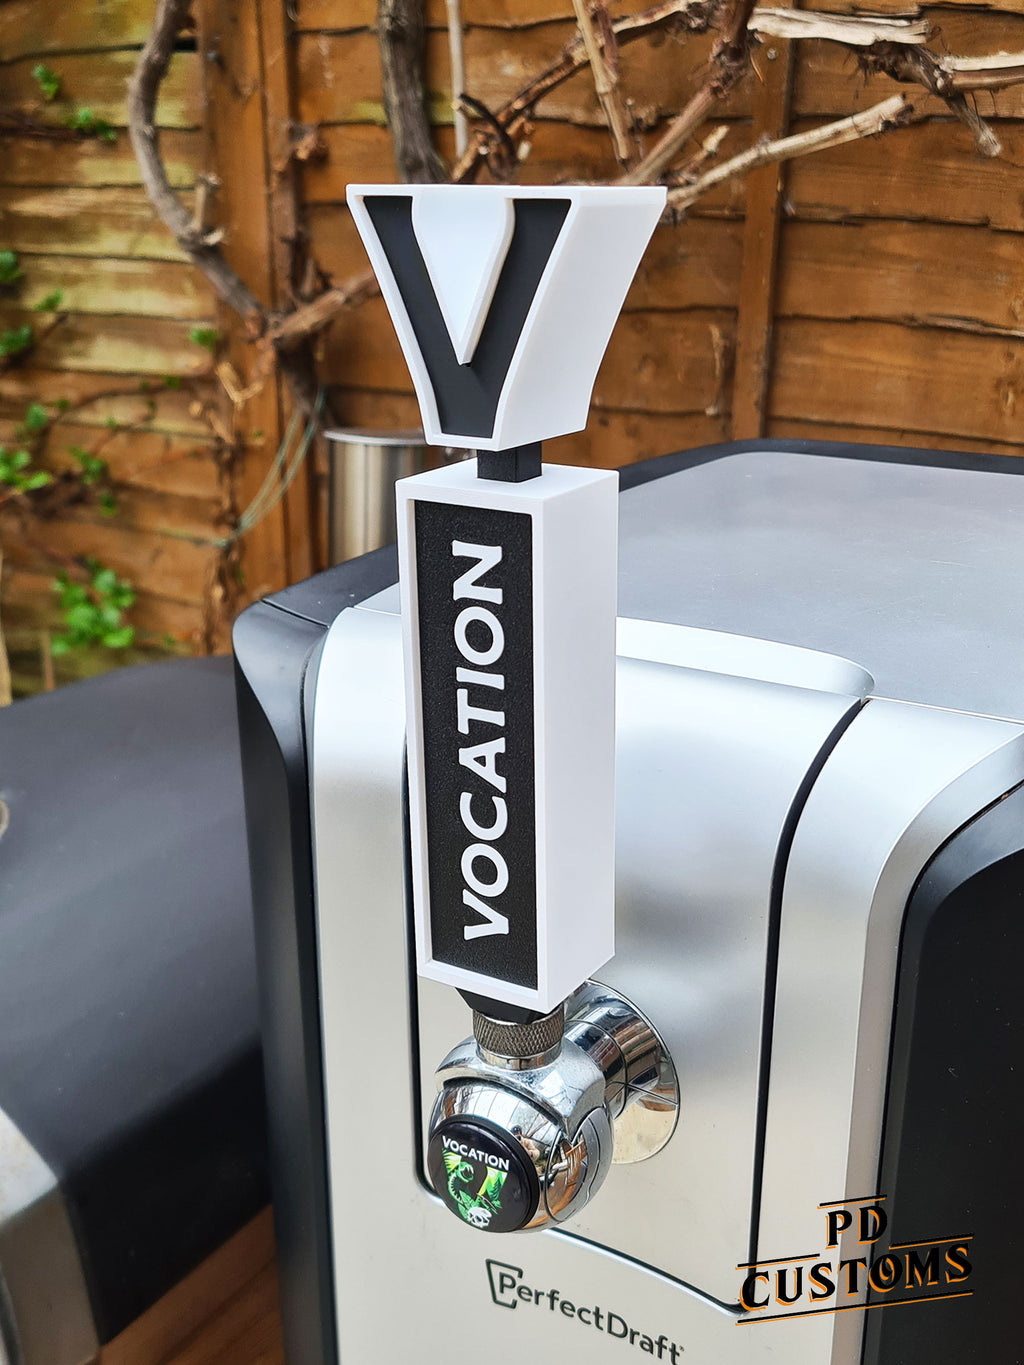 Vocation Perfect Draft Tap Handle